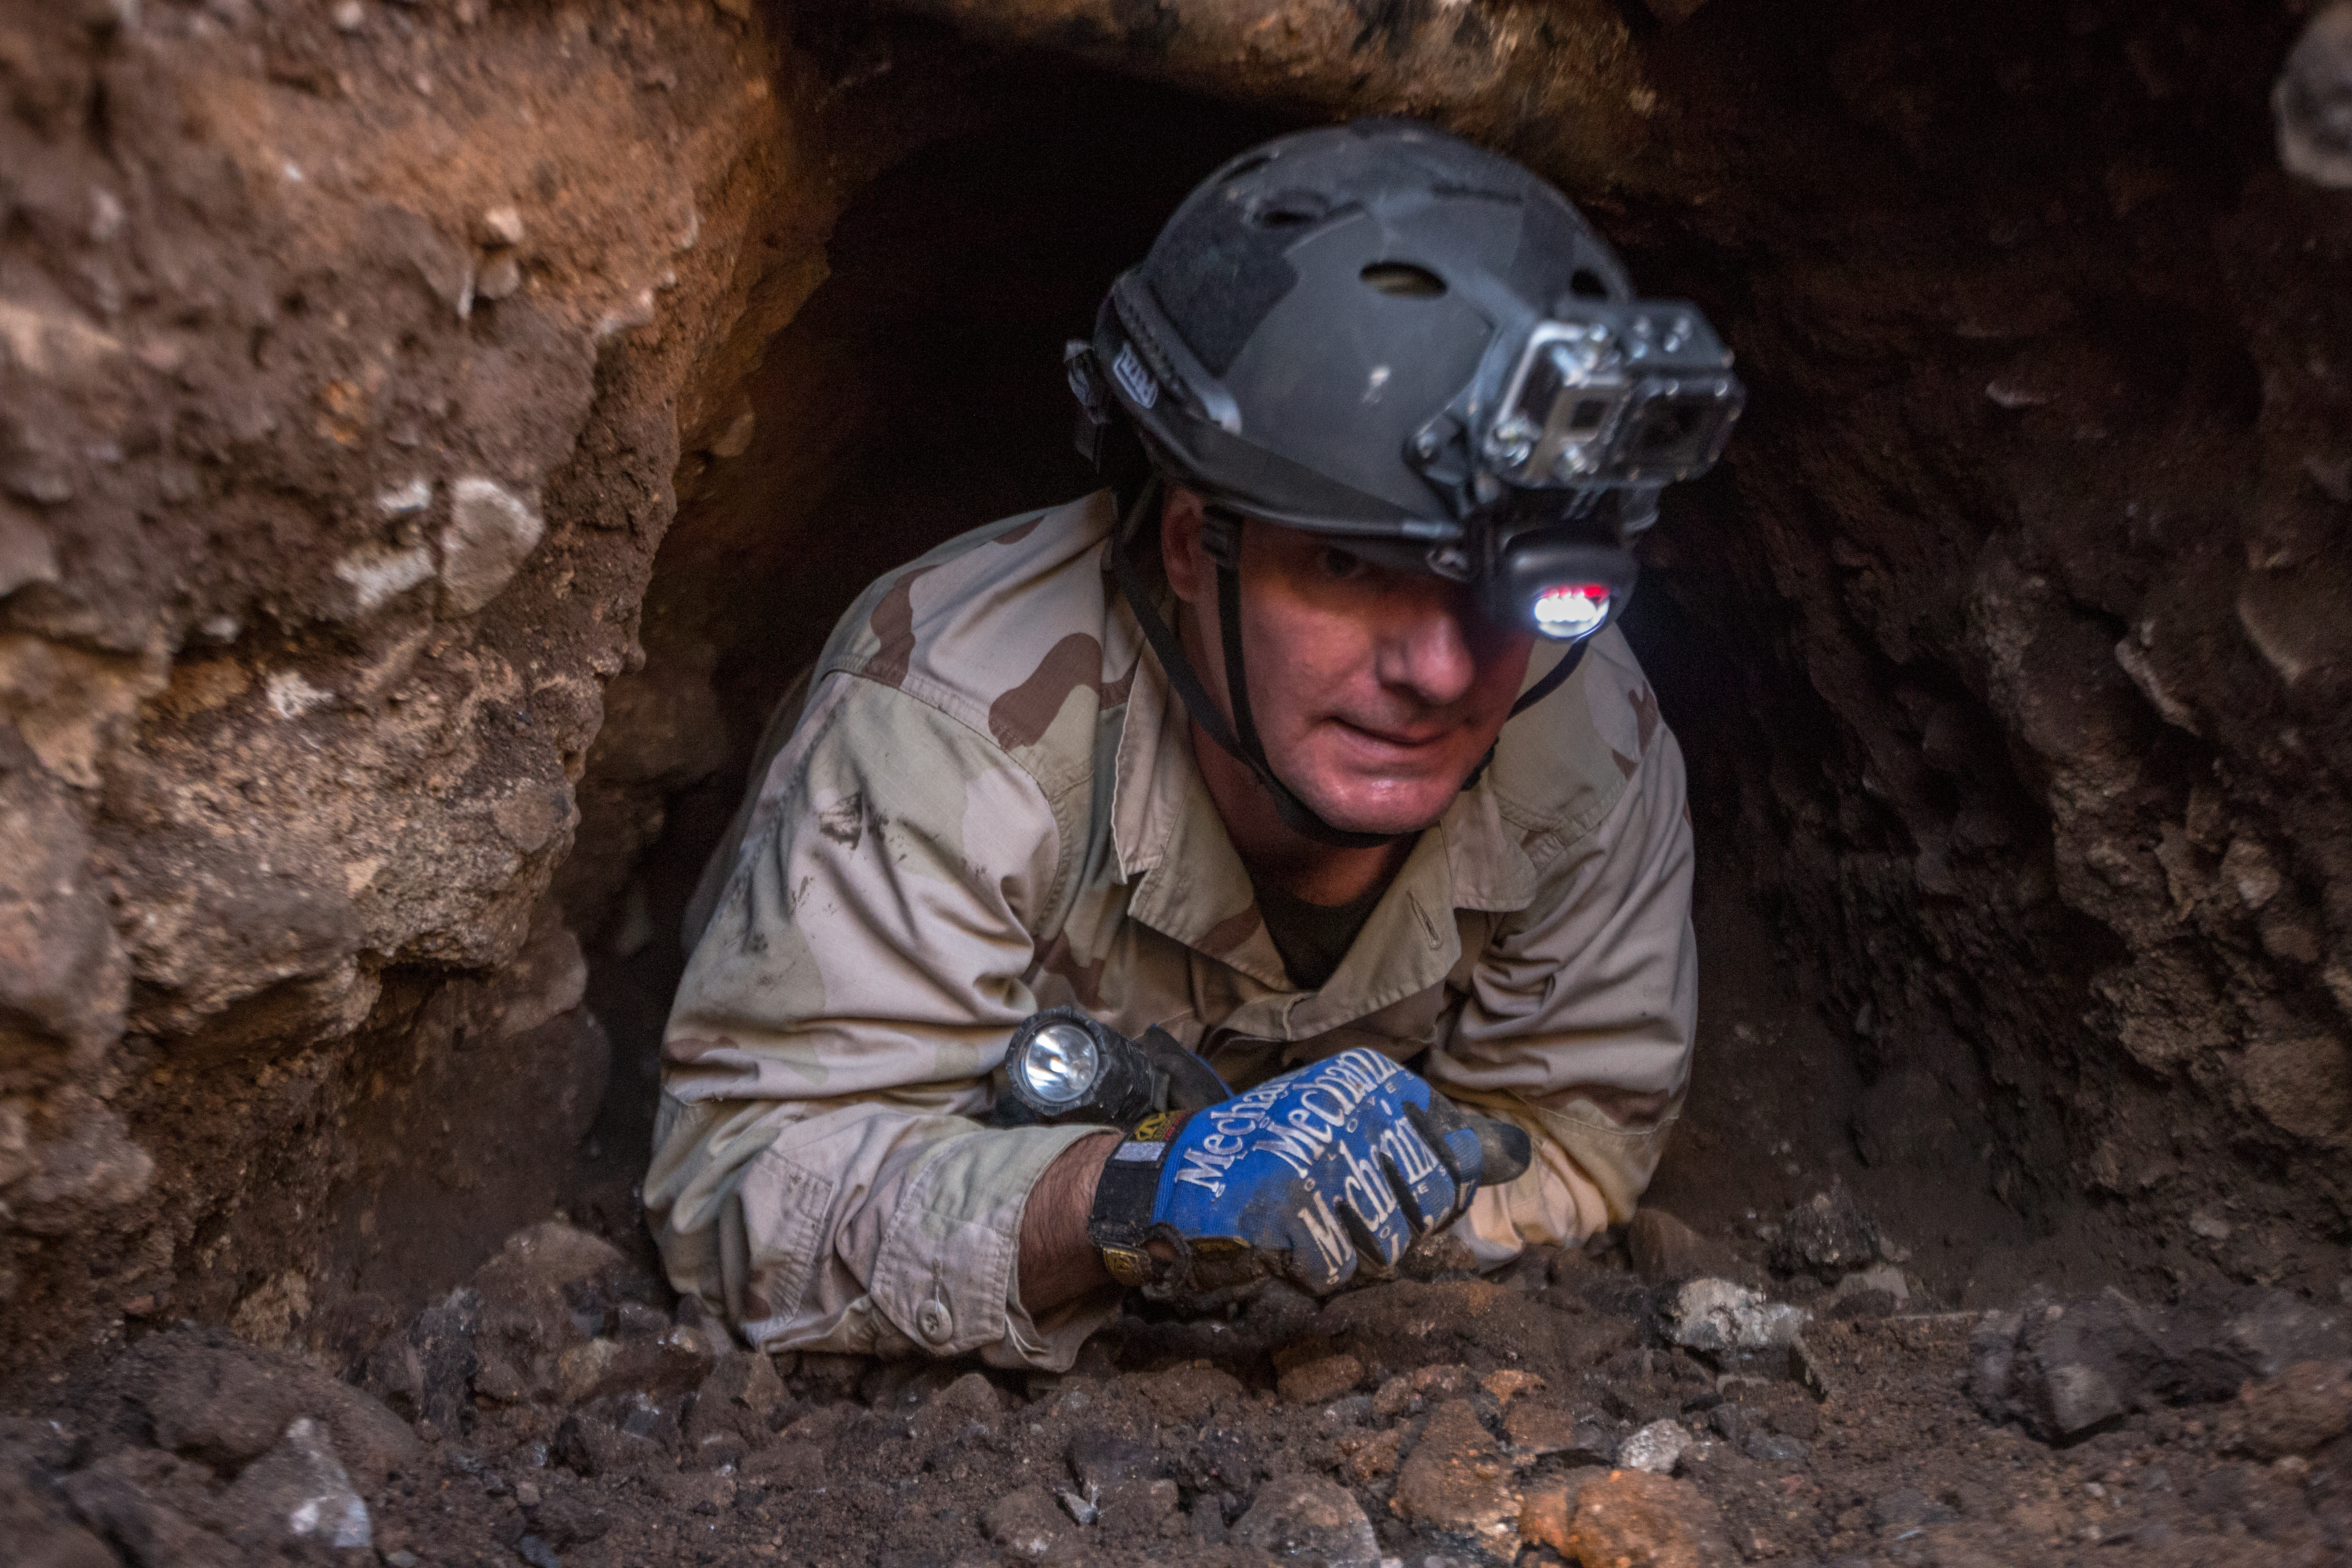 Supervisory Border Patrol Agent Thomas Pittman emerges from the hand dug tunnel section